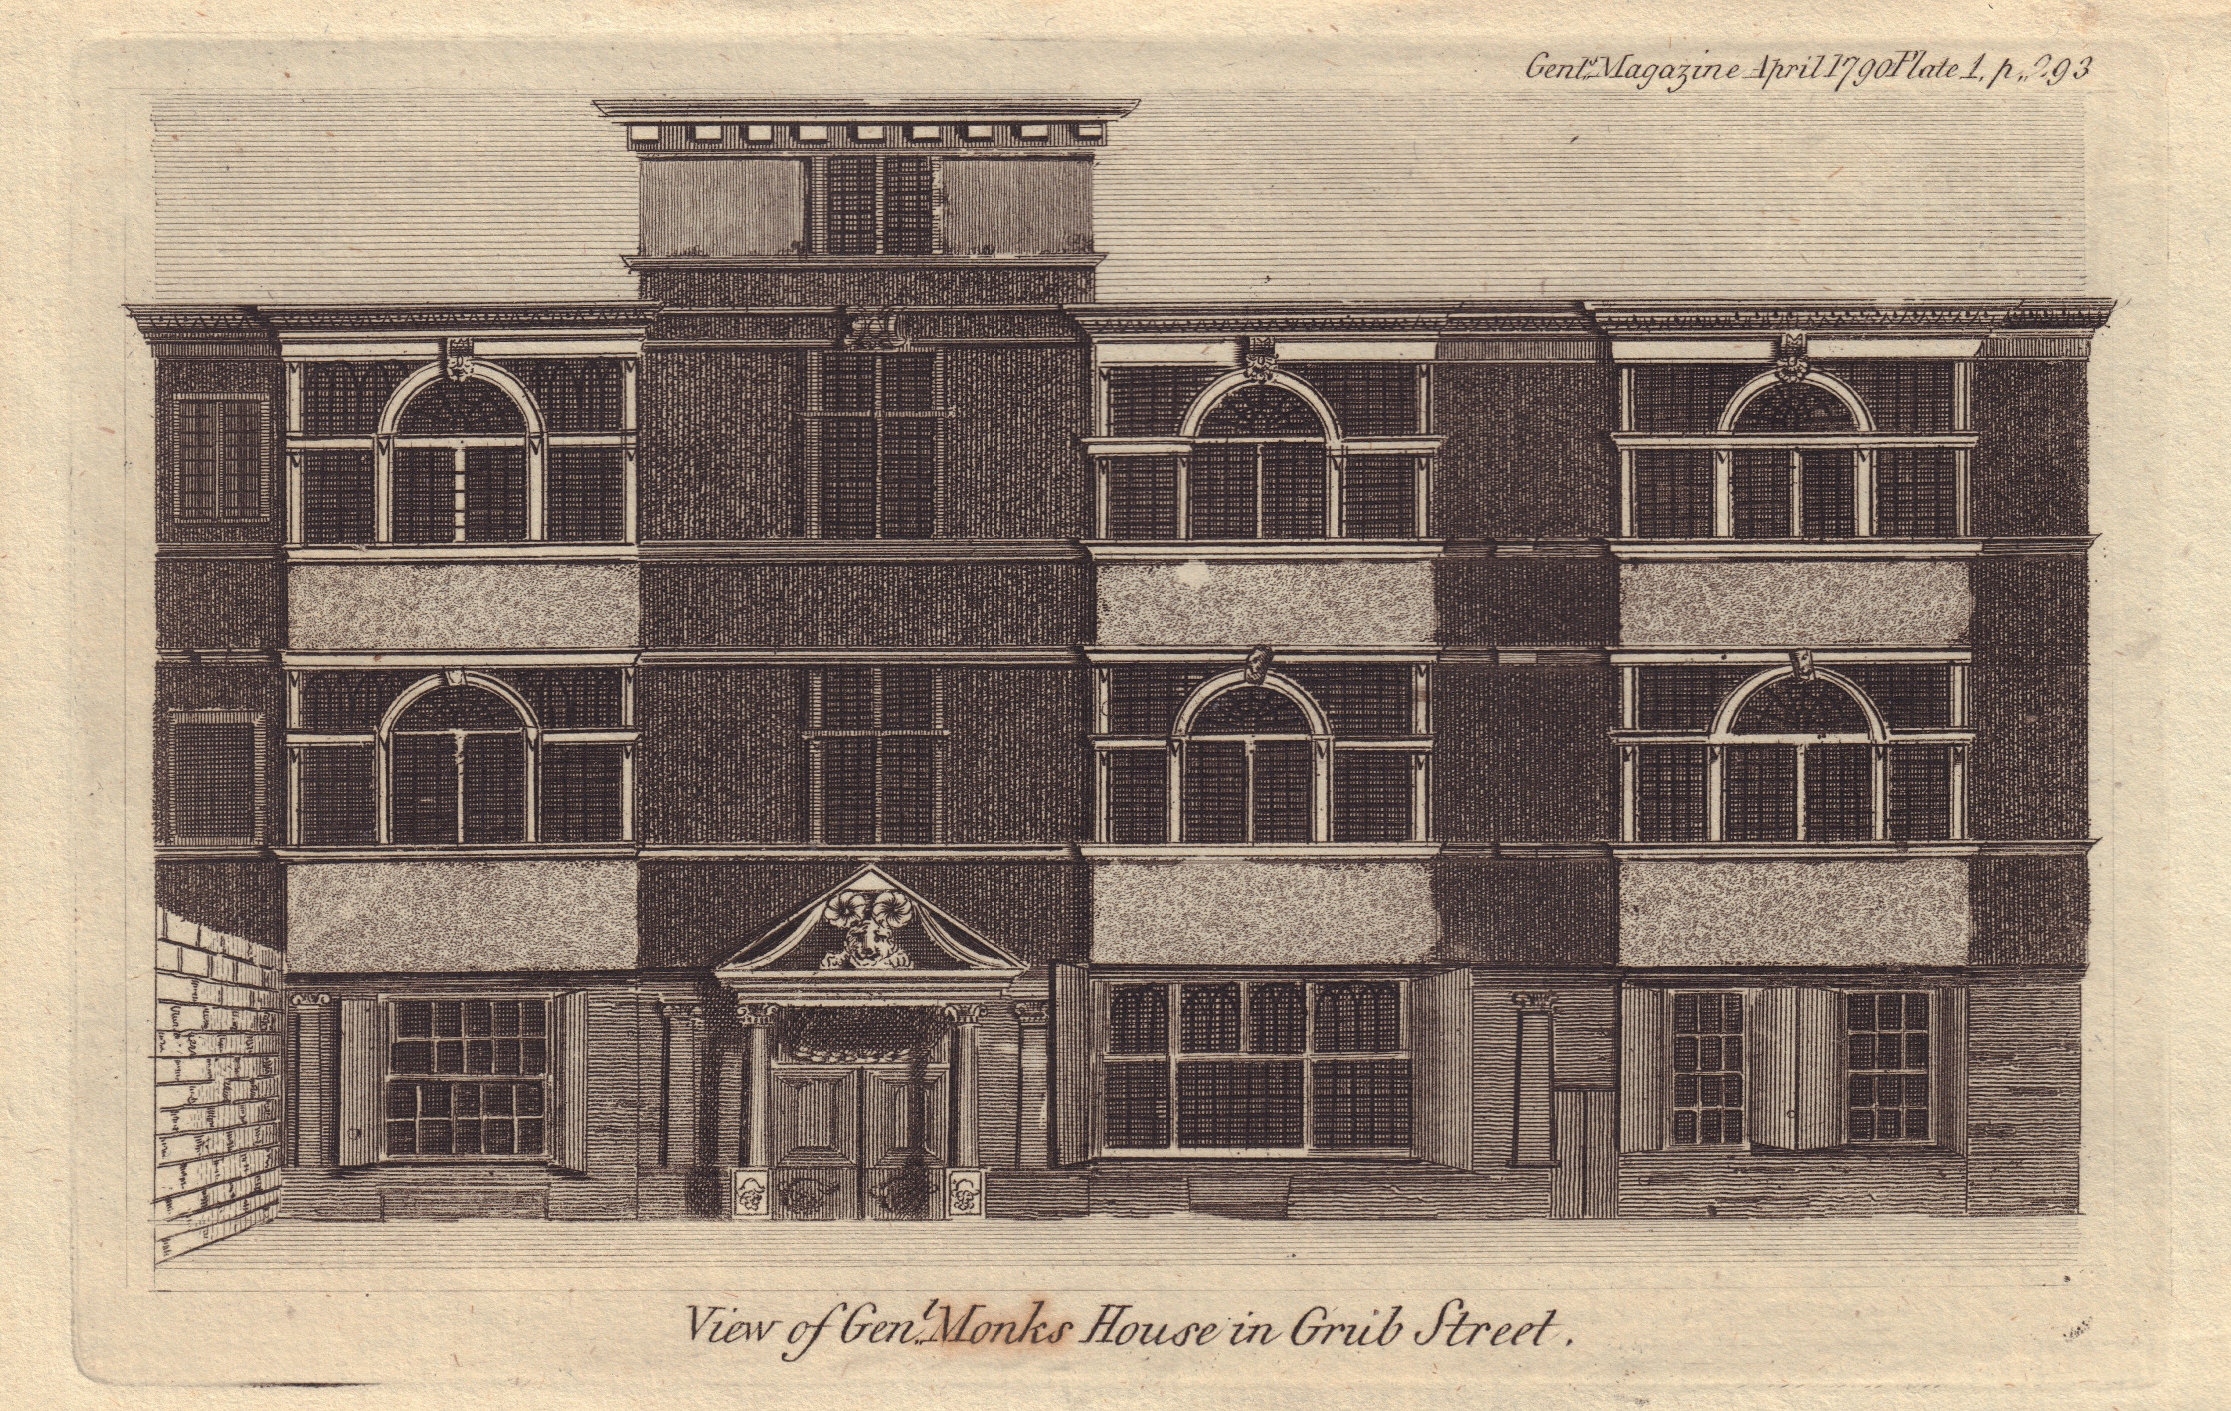 Associate Product View of General Monk's House in Grub Street, London. Now Barbican Estate 1790